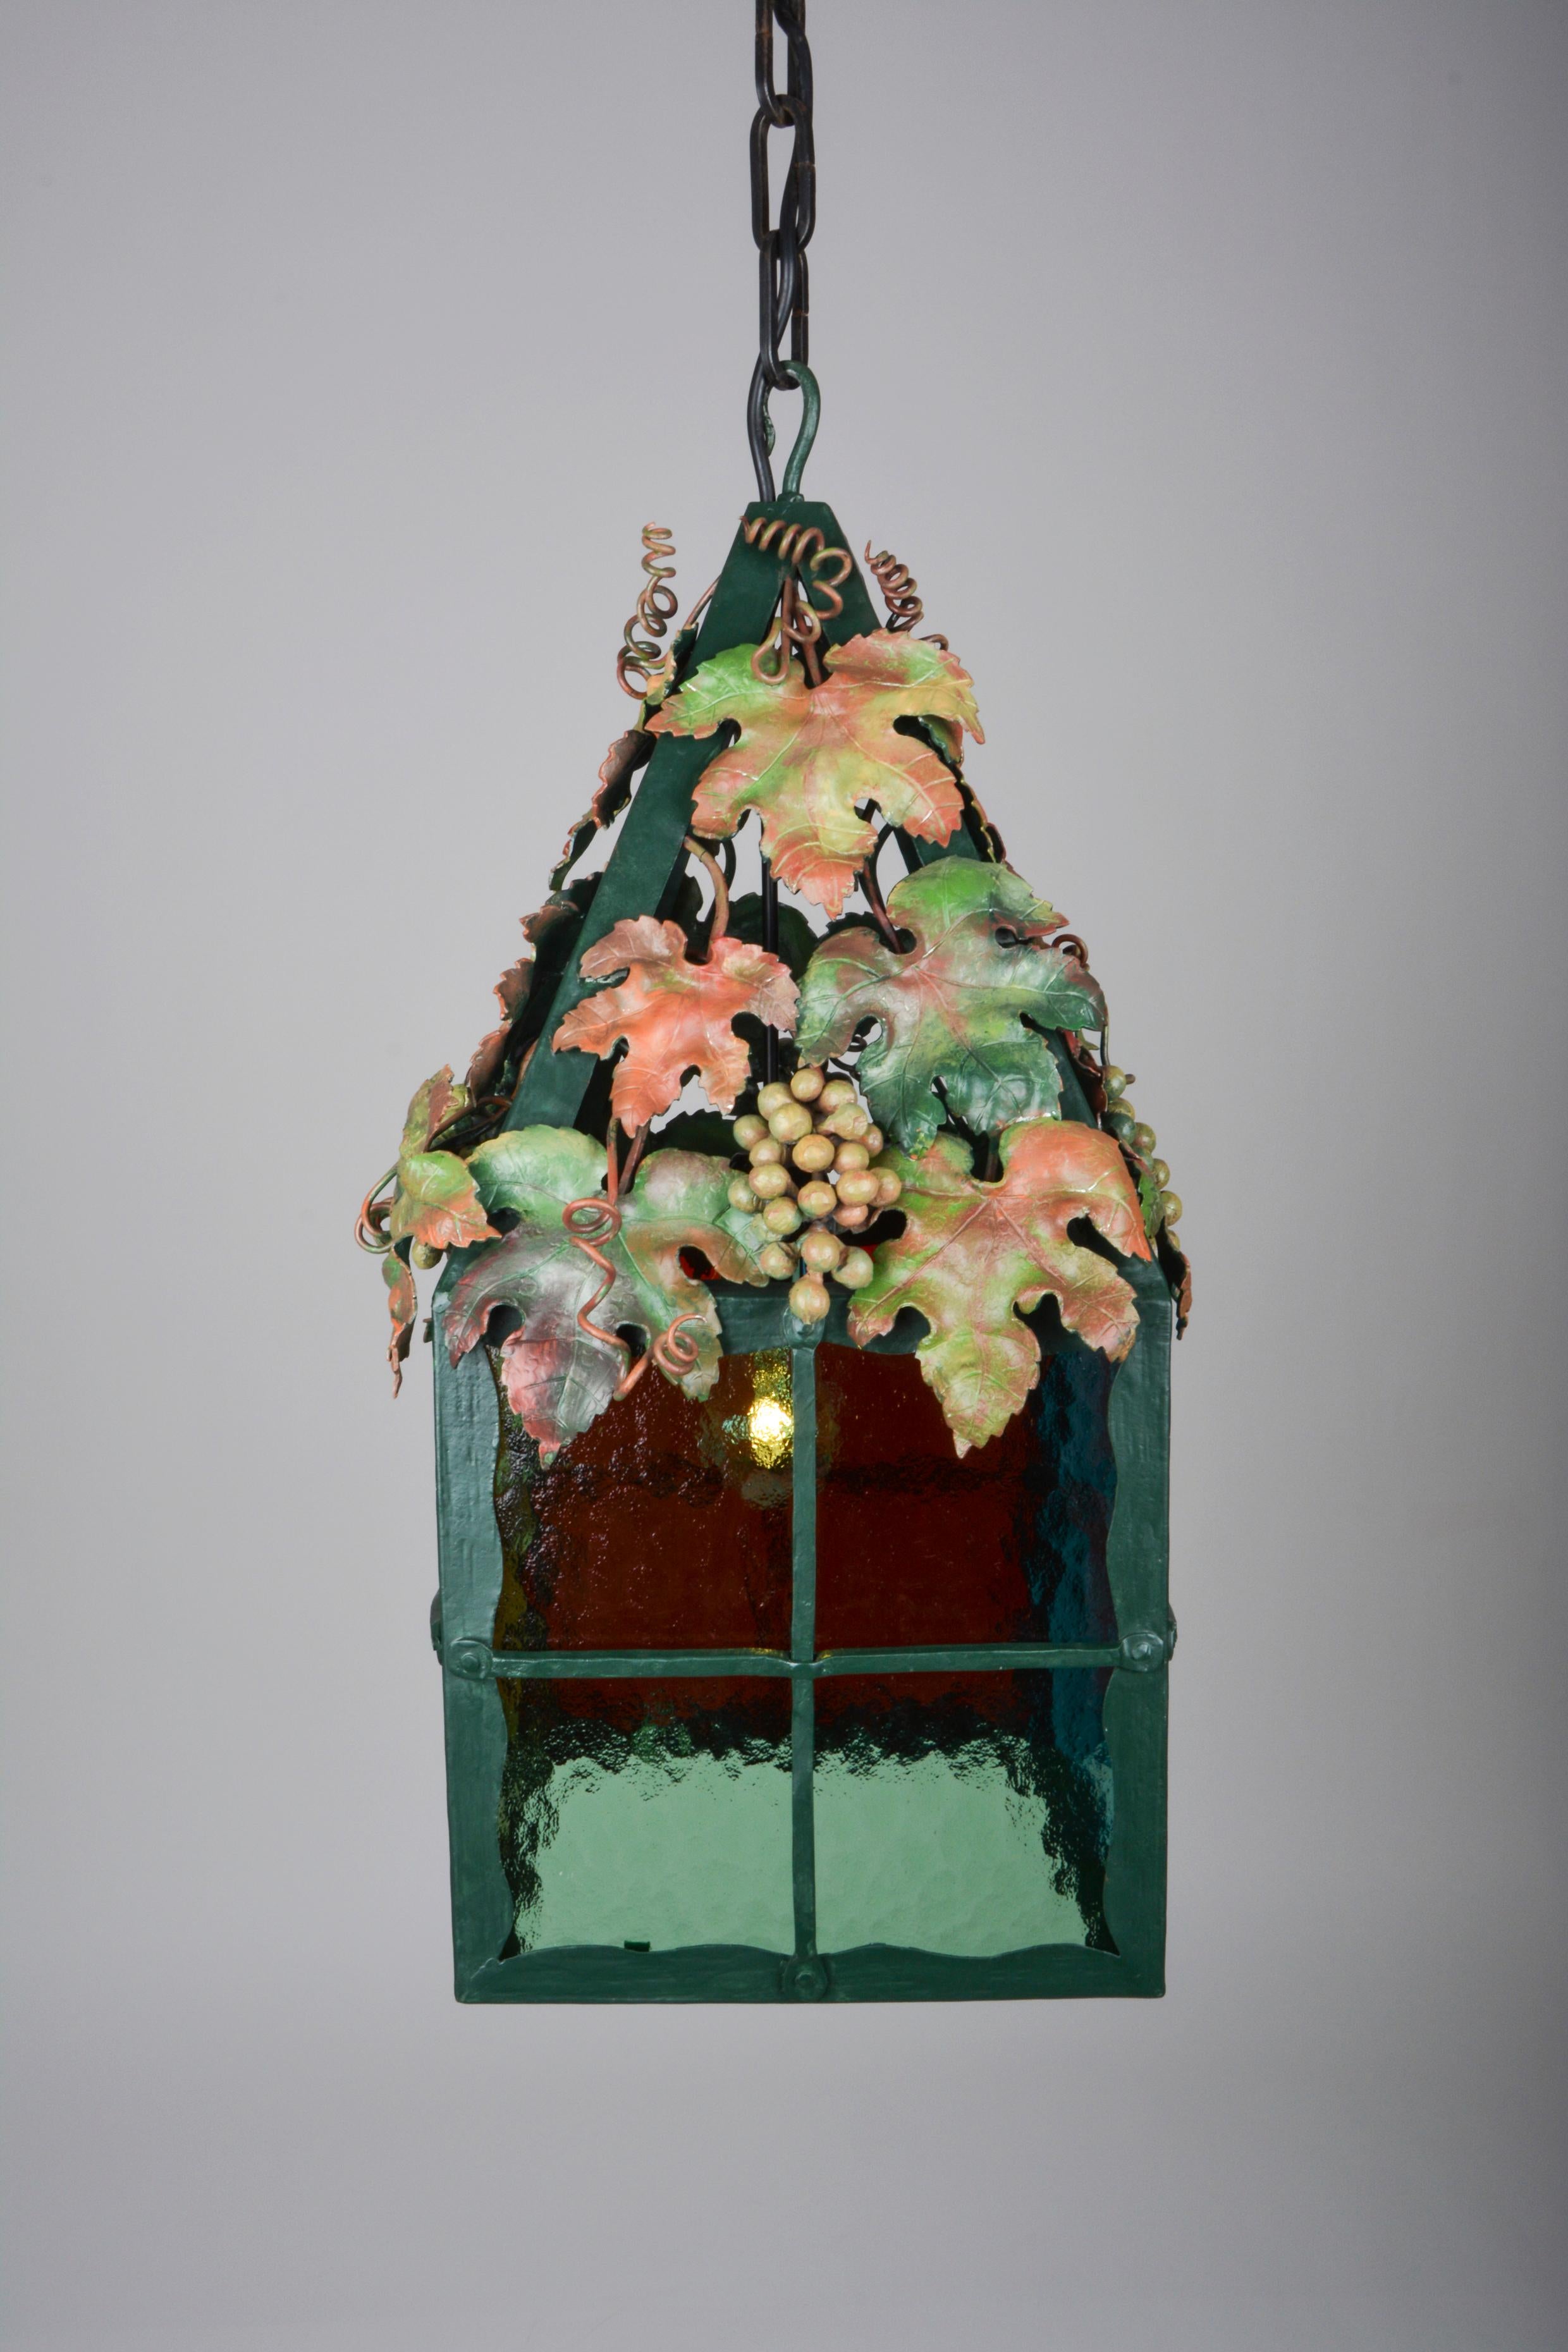 Viennese “Heurigen” Lantern of Wrought Iron with Tinted Glass Wine Leaf Decor In Good Condition For Sale In Vienna, AT